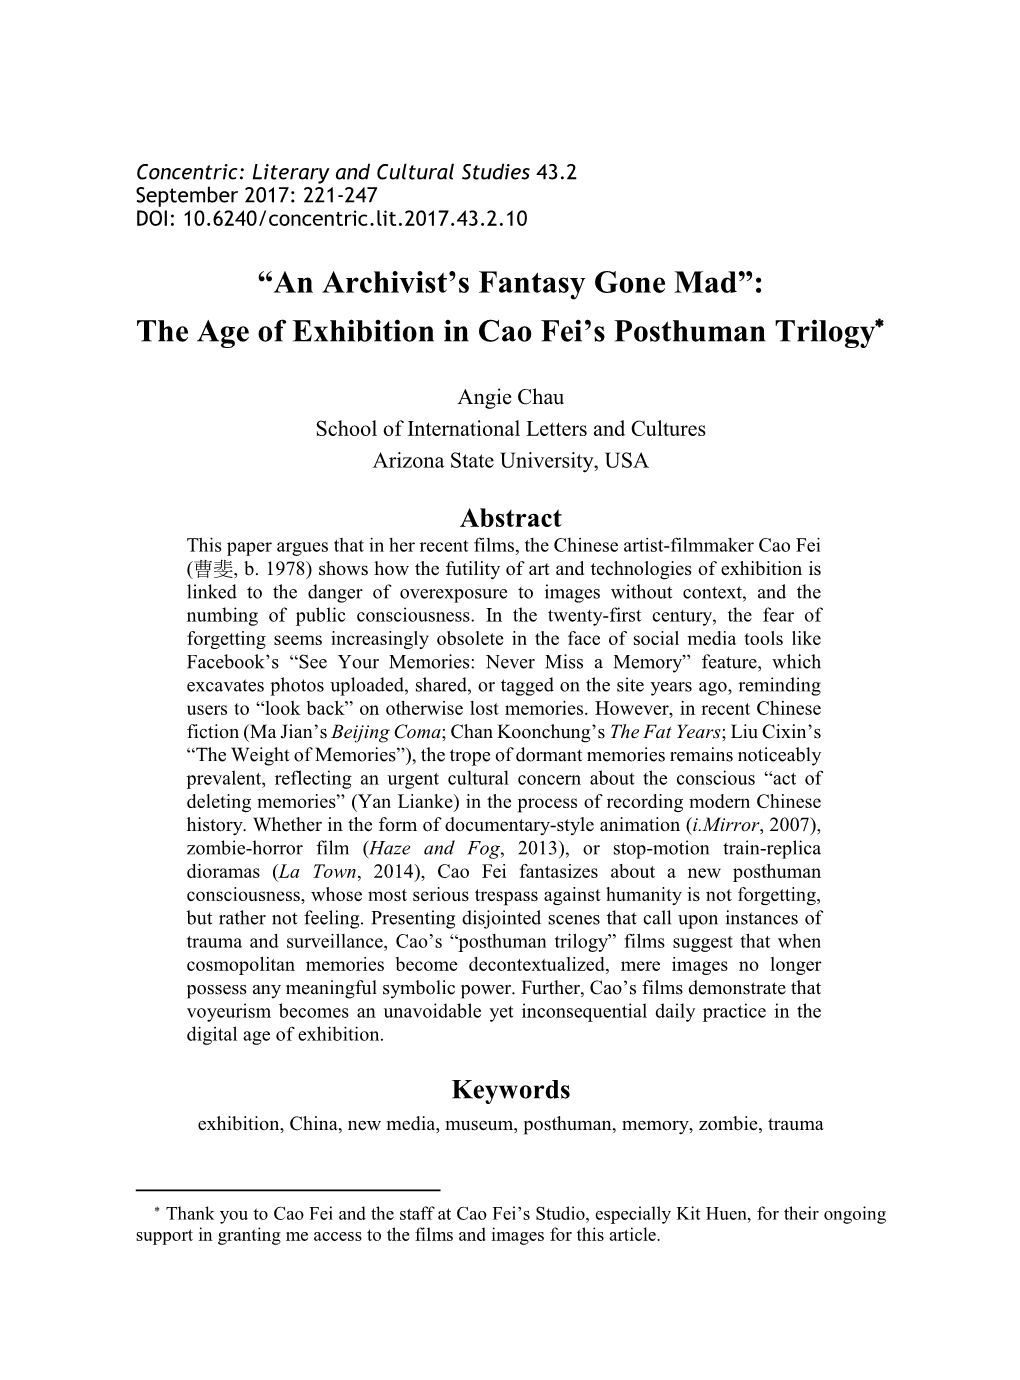 The Age of Exhibition in Cao Fei's Posthuman Trilogy